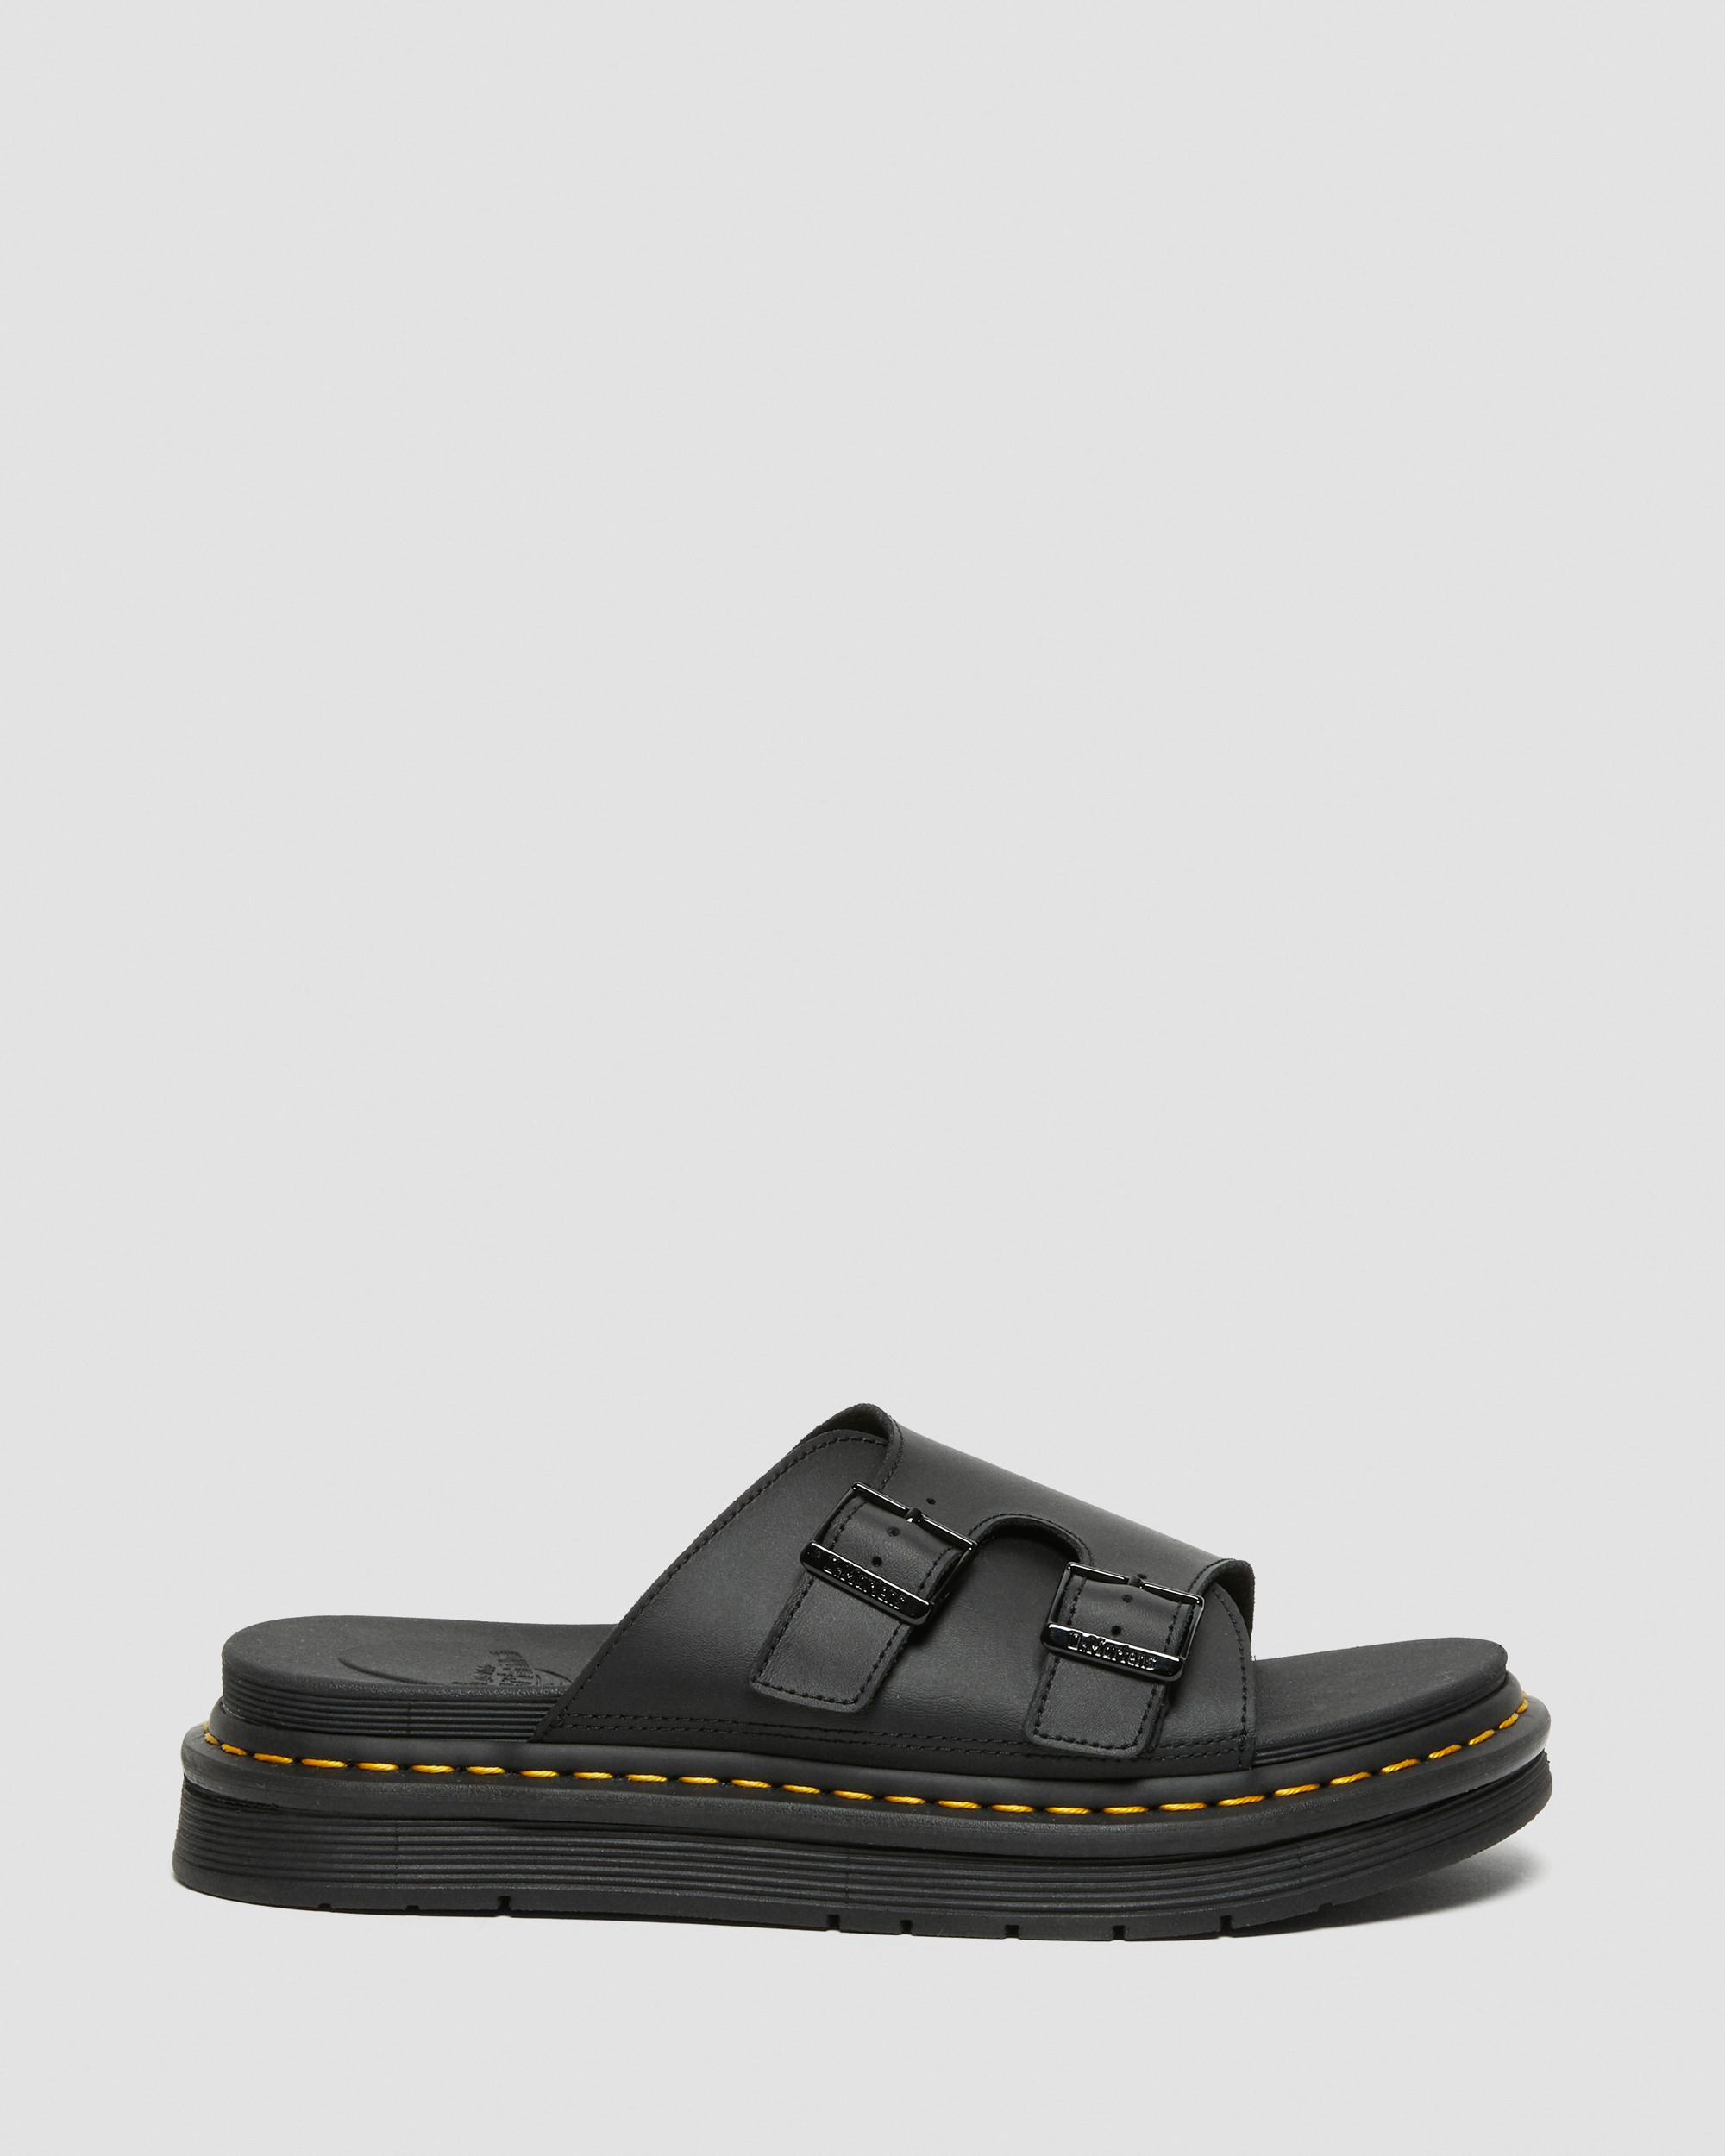 DAX SLIP ON LEATHER SANDALS in Black